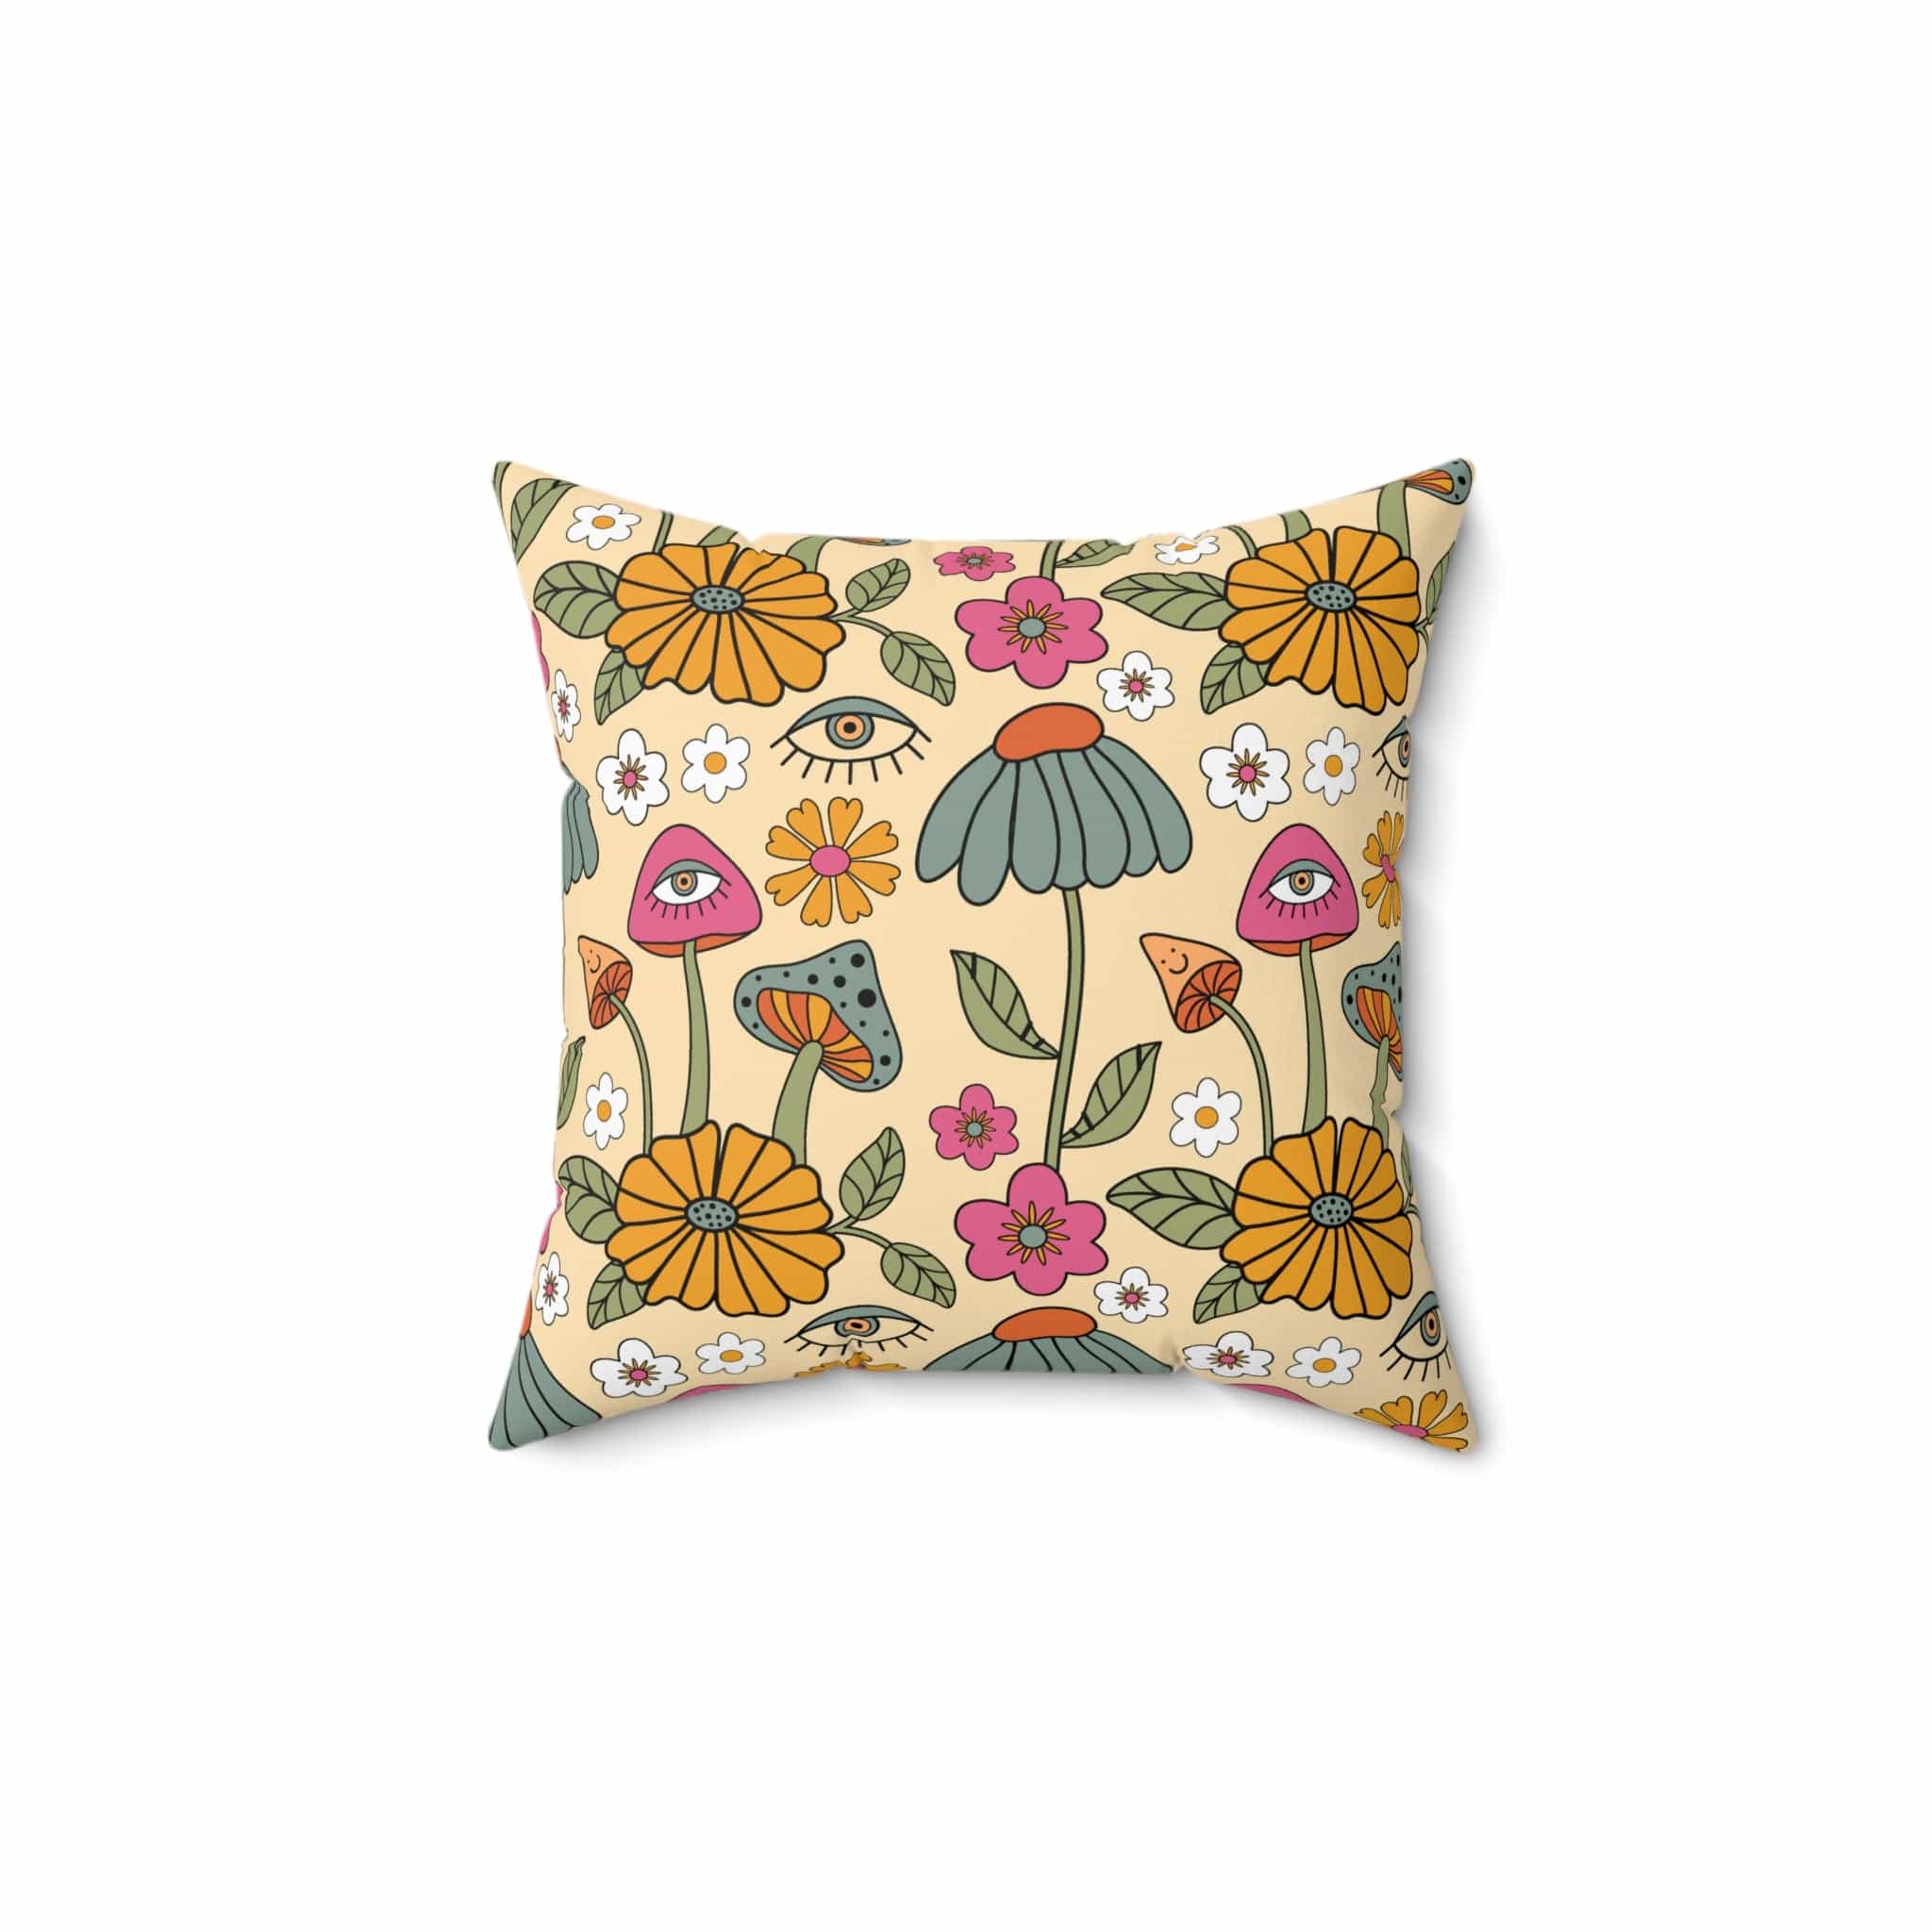 Kate McEnroe New York Hippie Mushroom Cottagecore Aesthetic Throw Pillow with Insert, Retro Floral 70s Psychedelic Accent Pillow Throw Pillows 14&quot; × 14&quot; 21748313160857796059